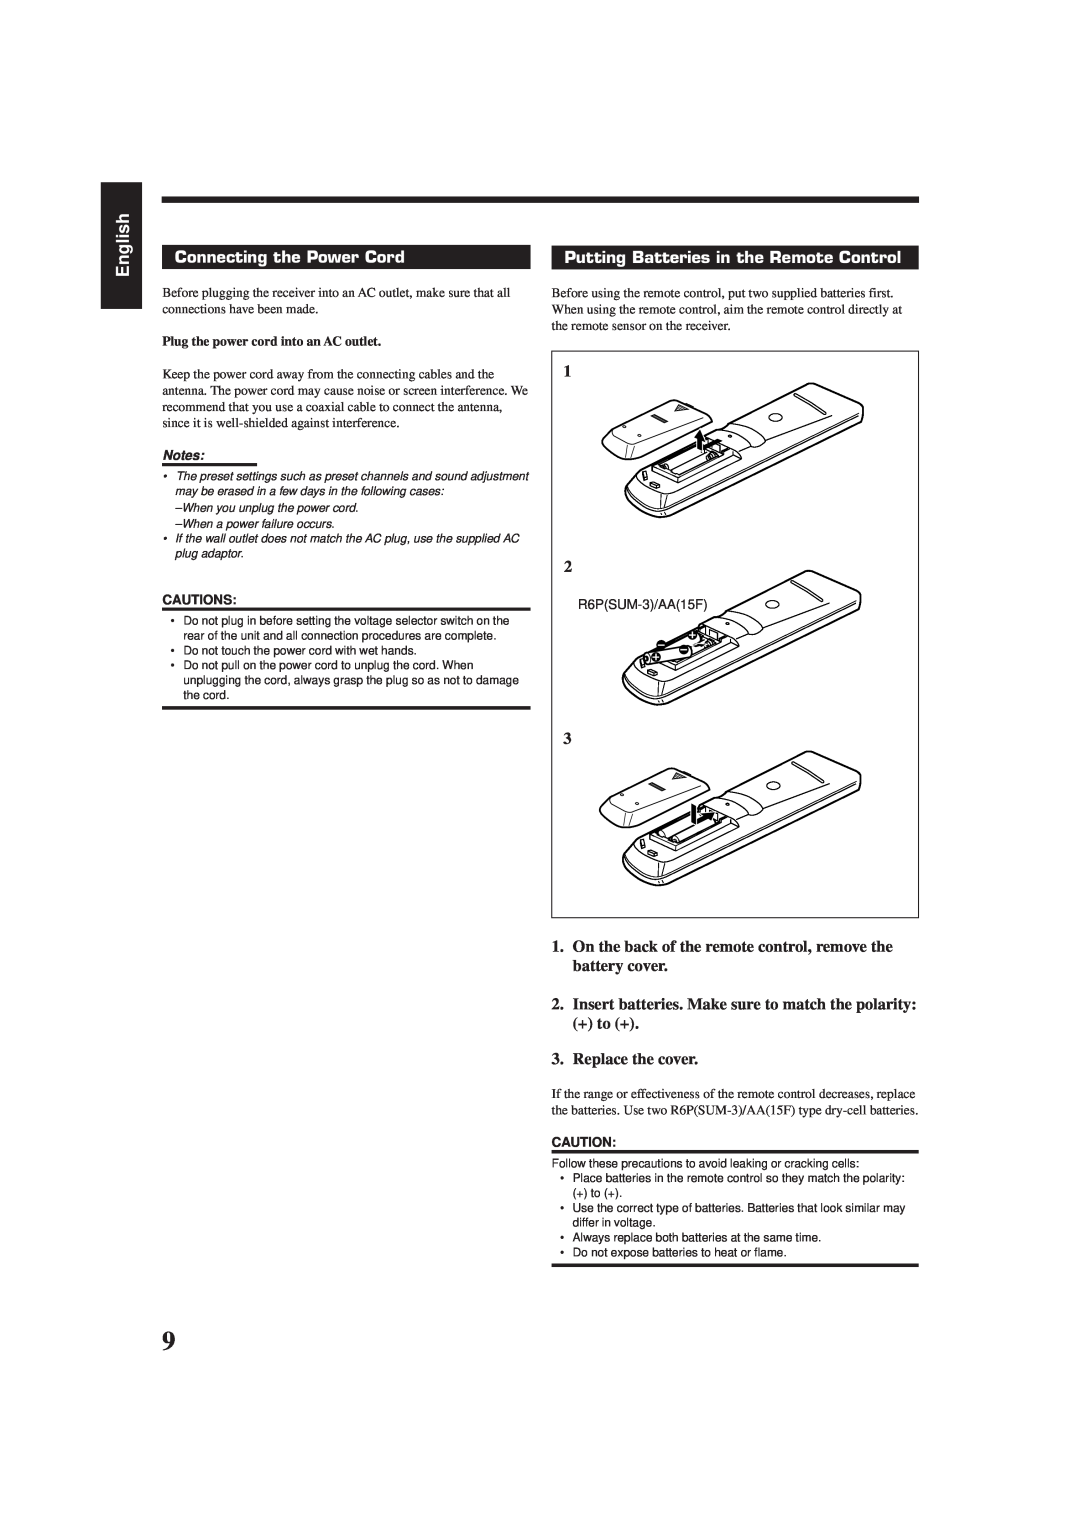 JVC RX-7001PGD manual English, Connecting the Power Cord, Putting Batteries in the Remote Control, Cautions 